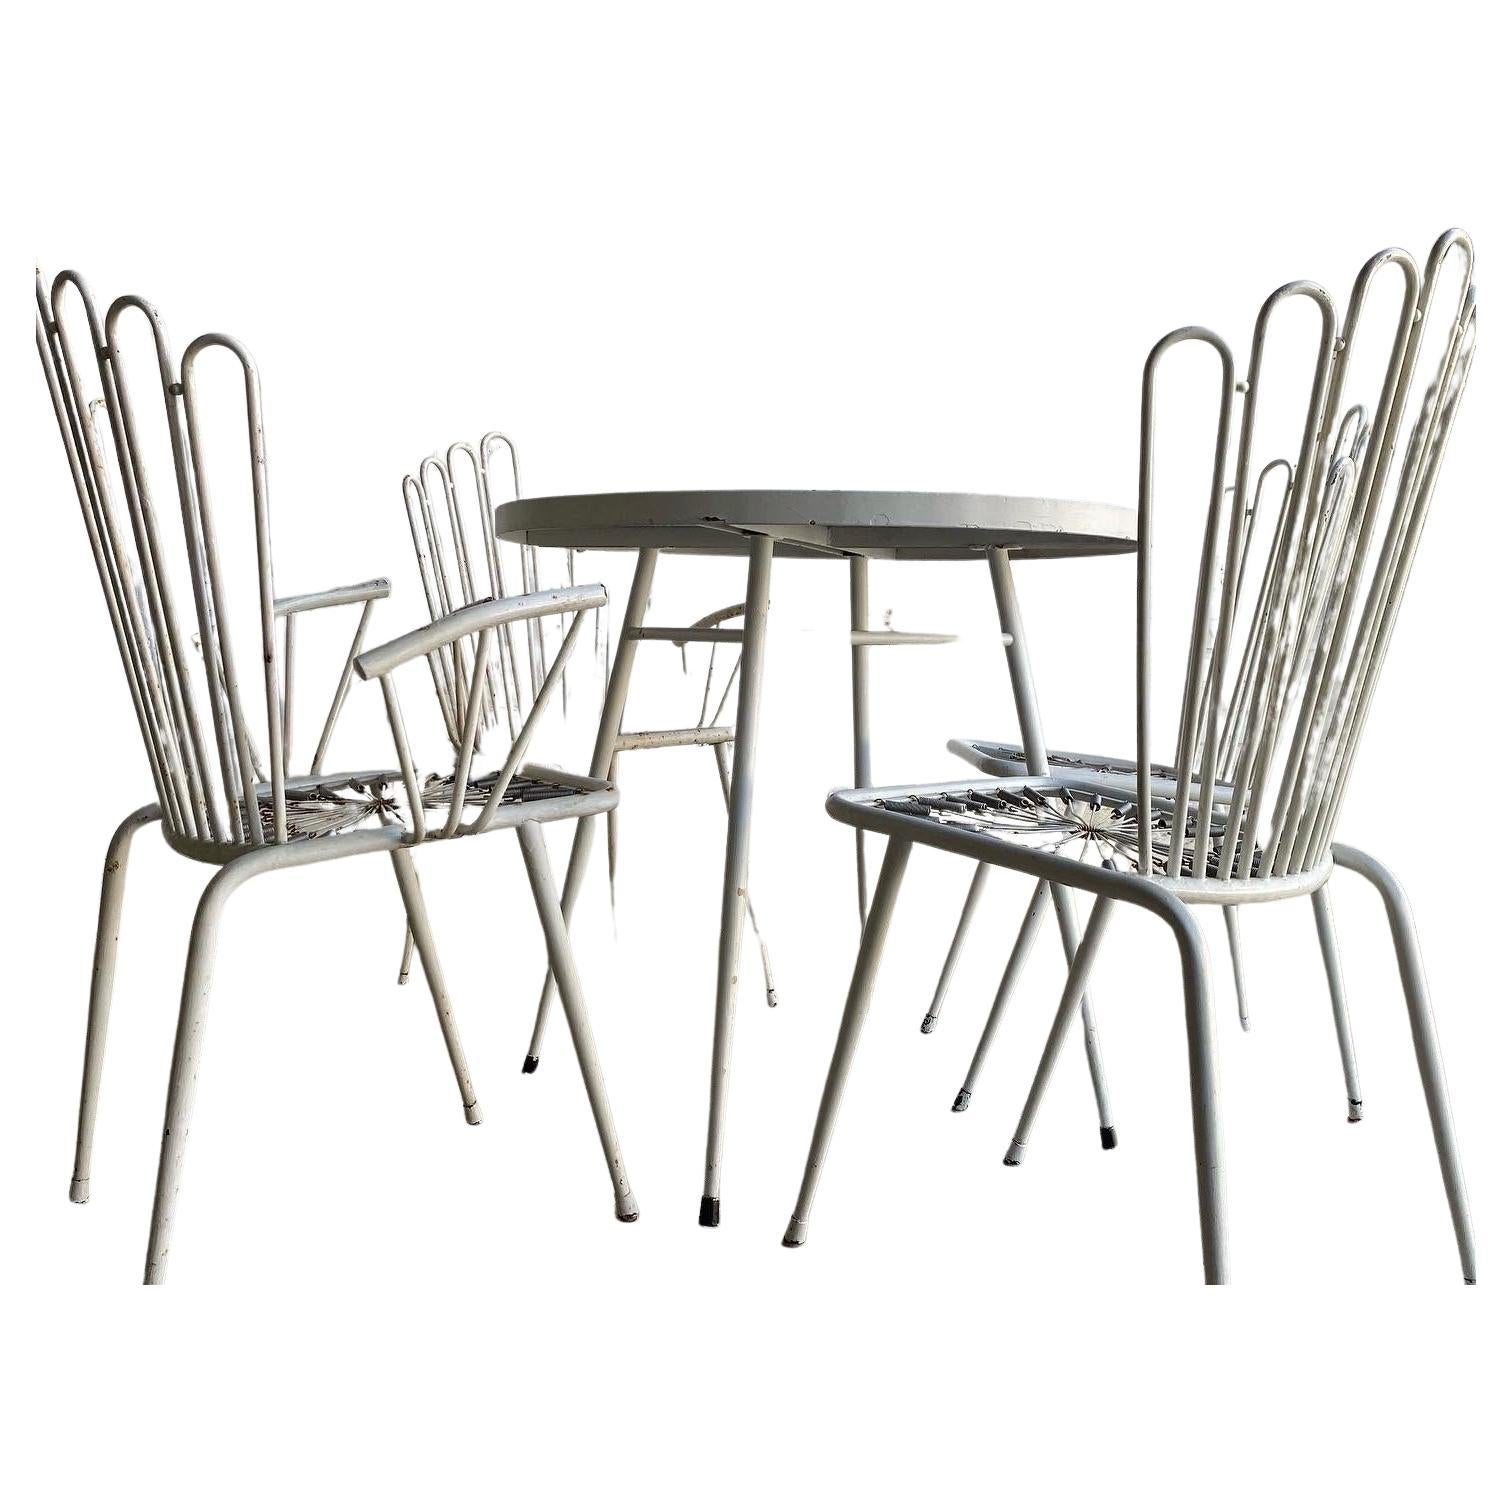 Mid-20th Century Patio Set in Style of Mathieu Mategot Table and Chairs 1950, France